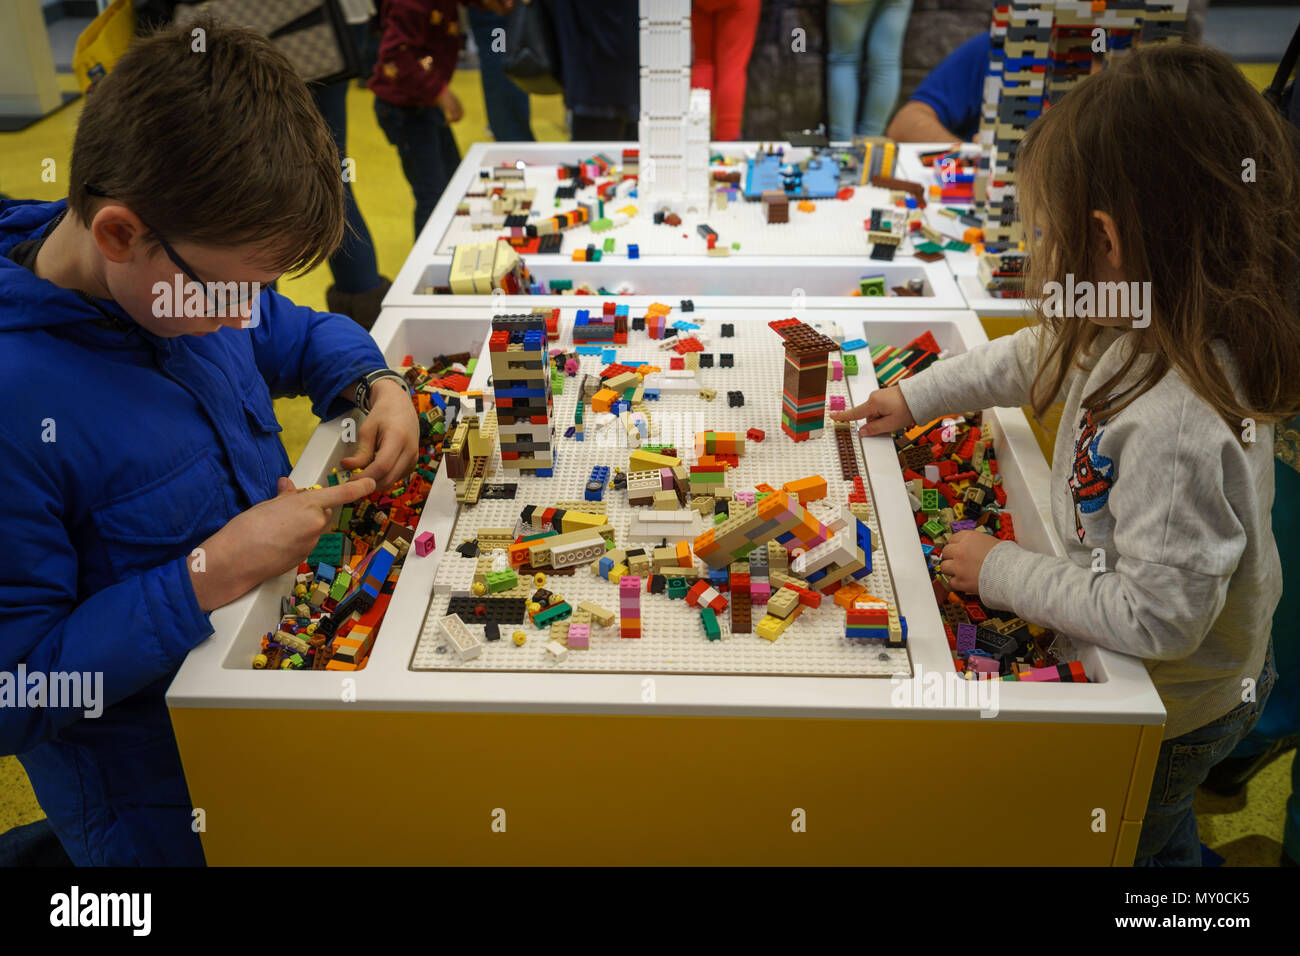 London, UK - November 2017. Kids playing with blocks in the Lego Store in Leicester Square. Landscape format. Stock Photo